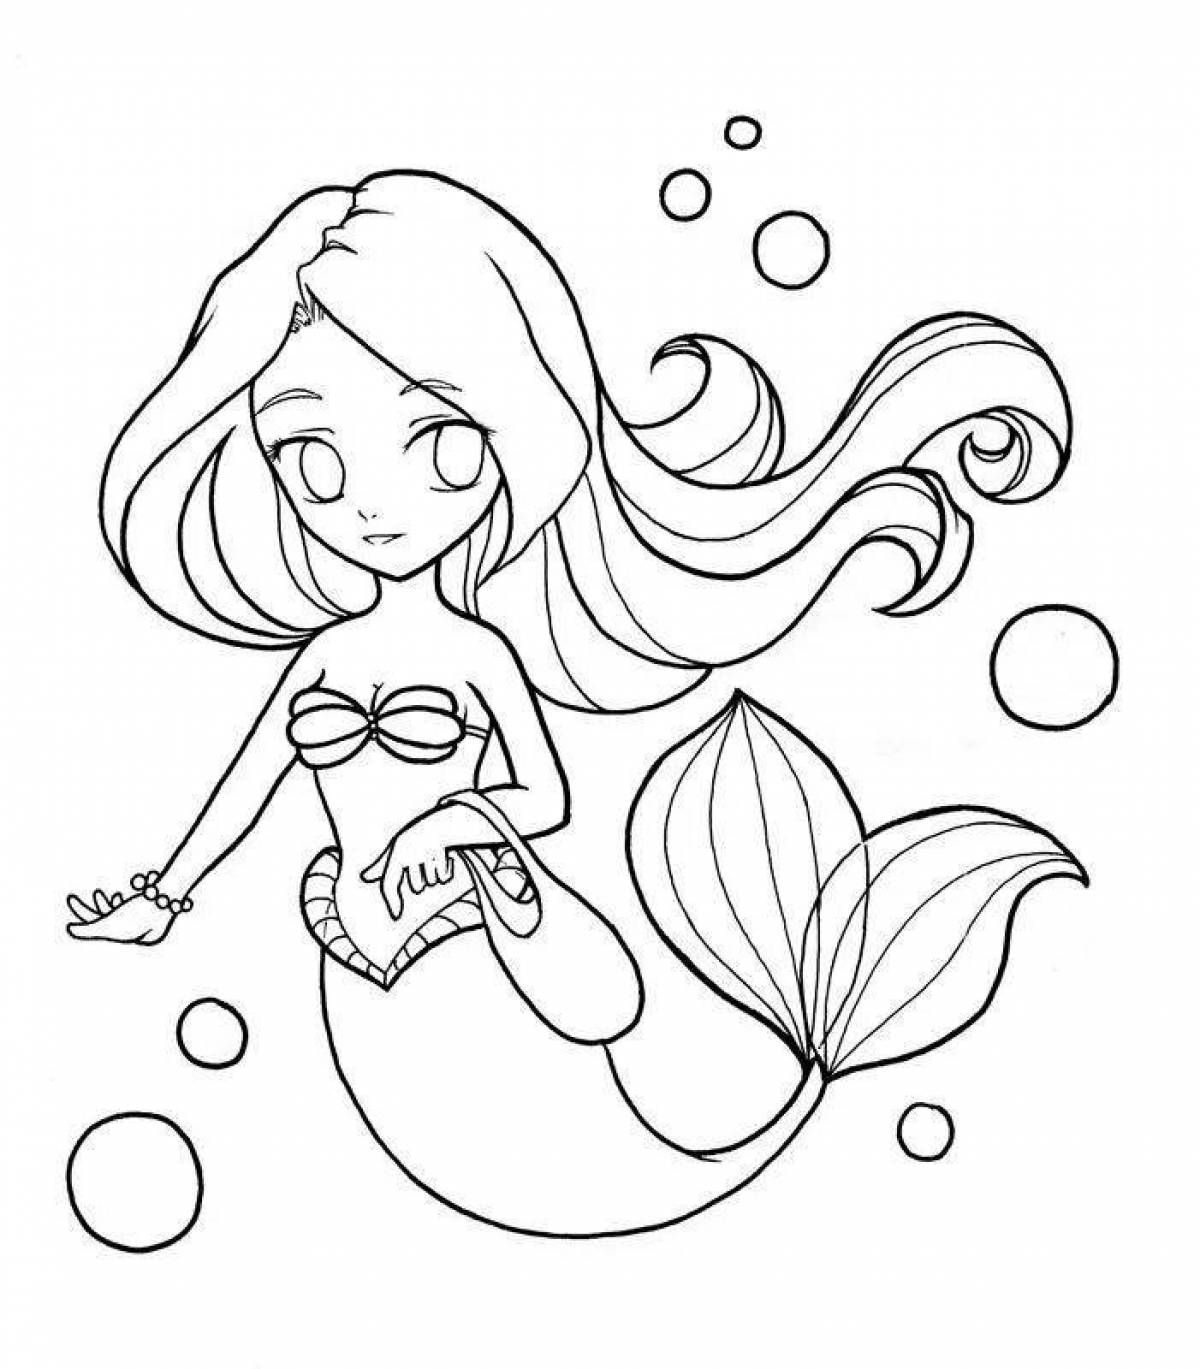 Fun coloring pages easy for girls